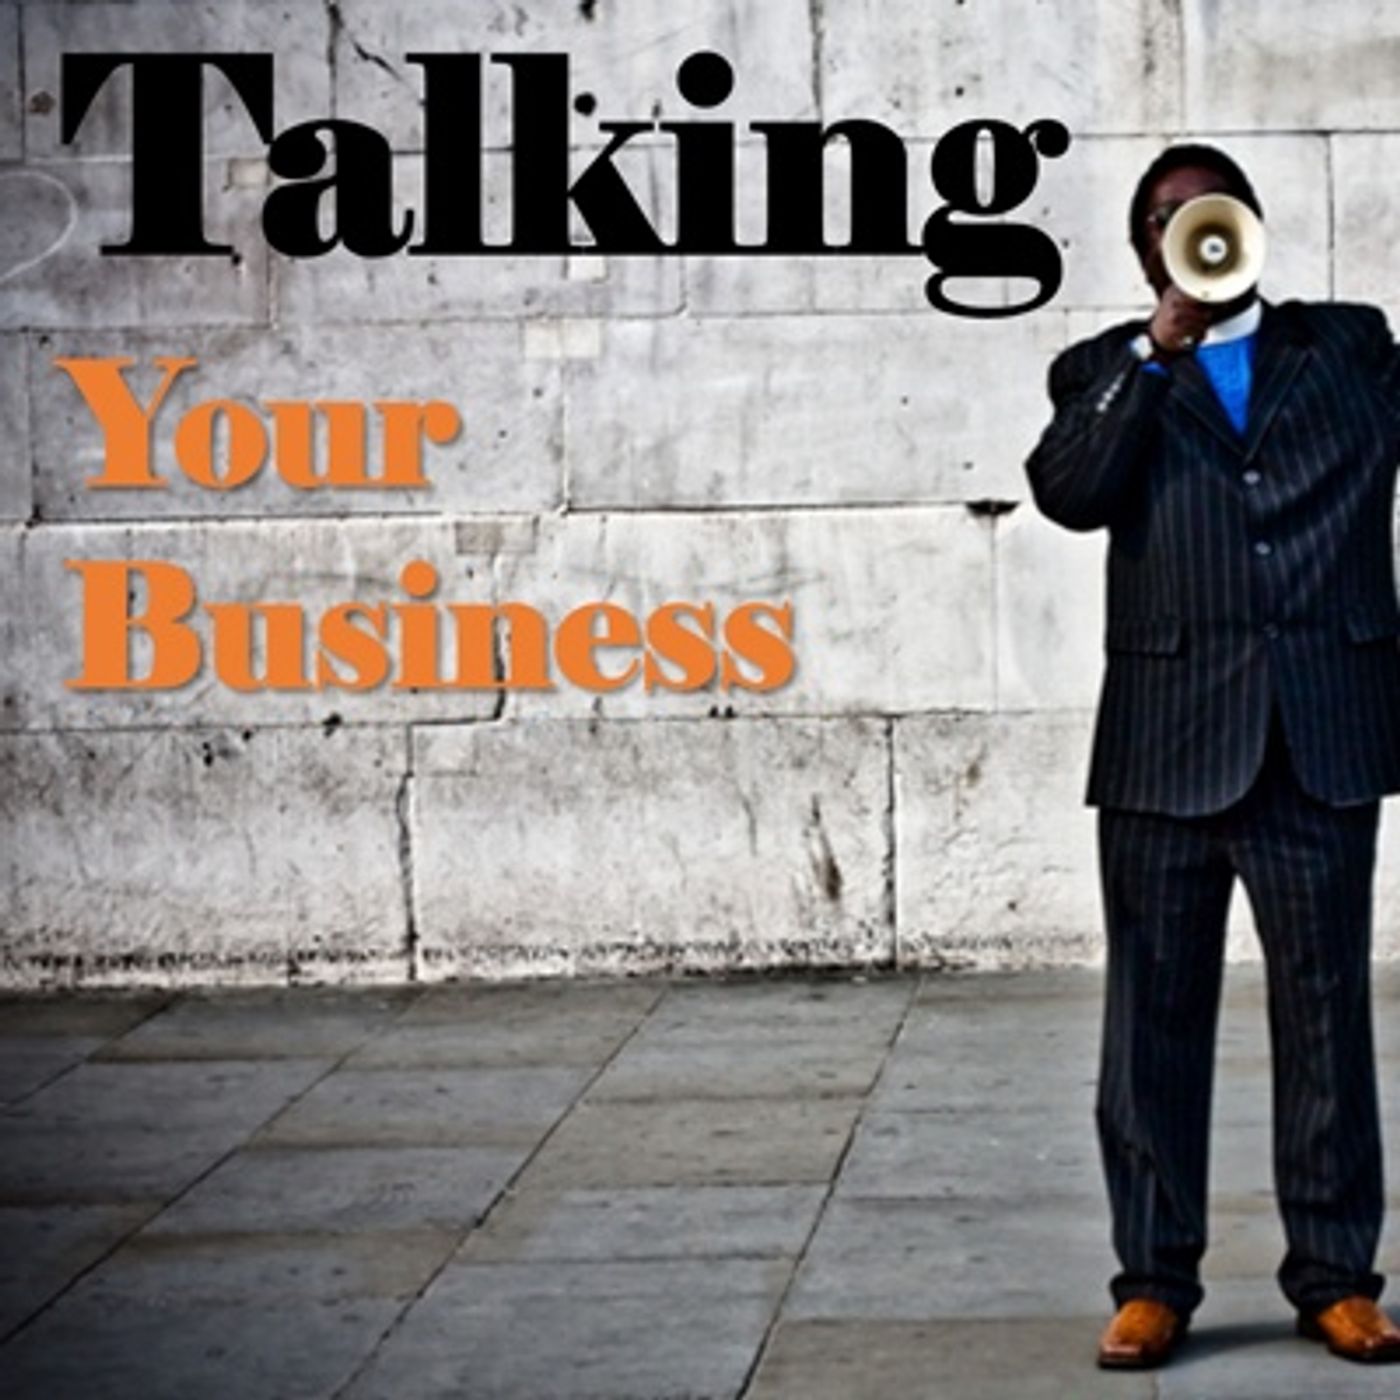 Episode 1 - Talk Your Business - FactorCareers Live!